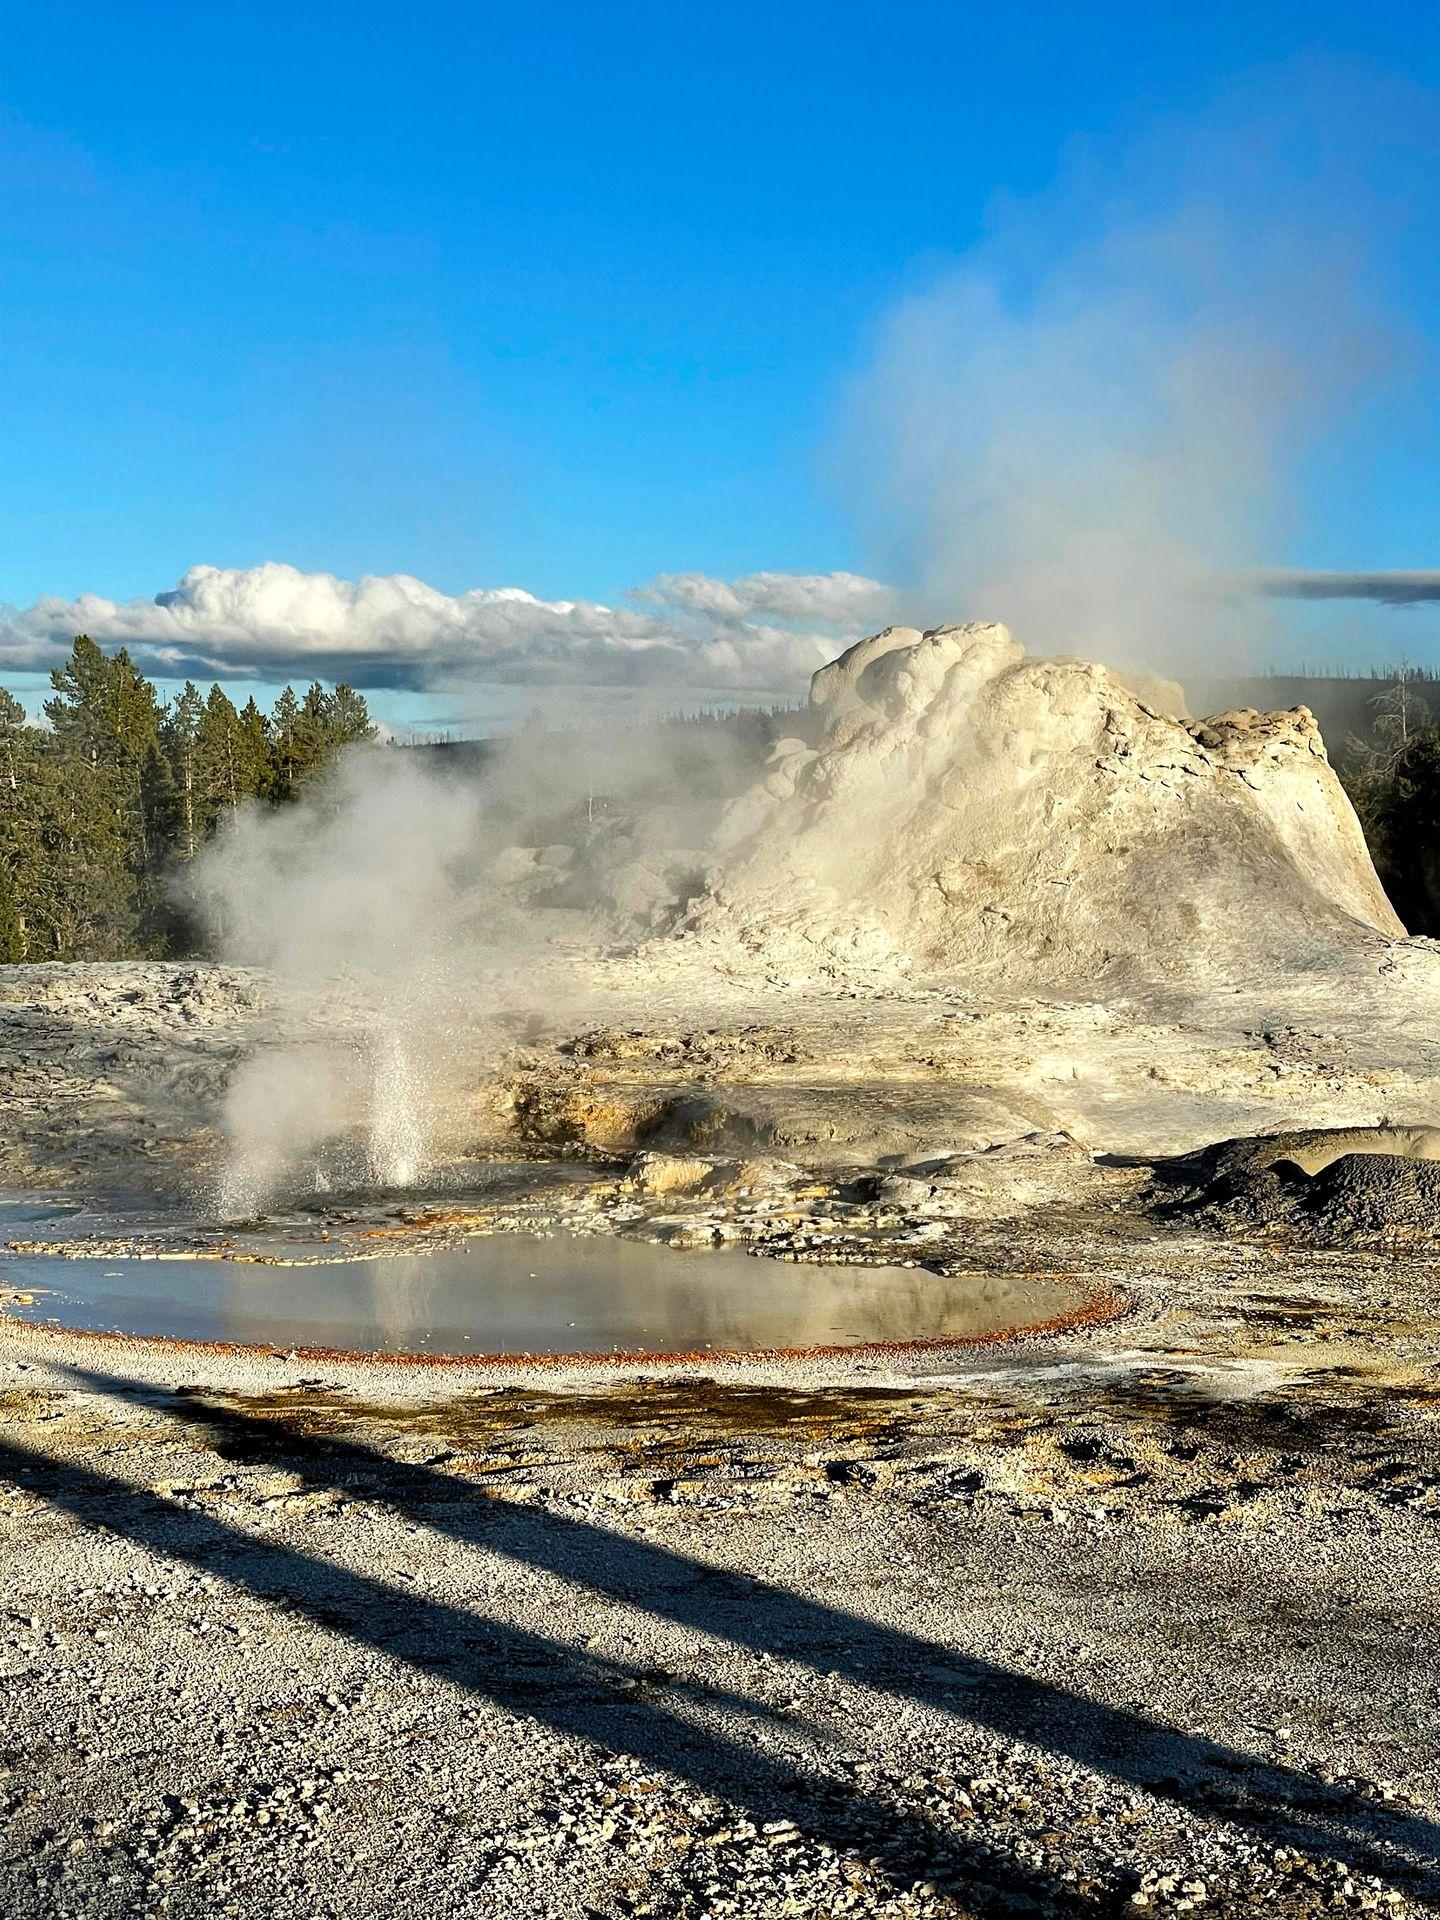 A view of the Castle Geyser with a hot spring steaming next to it.